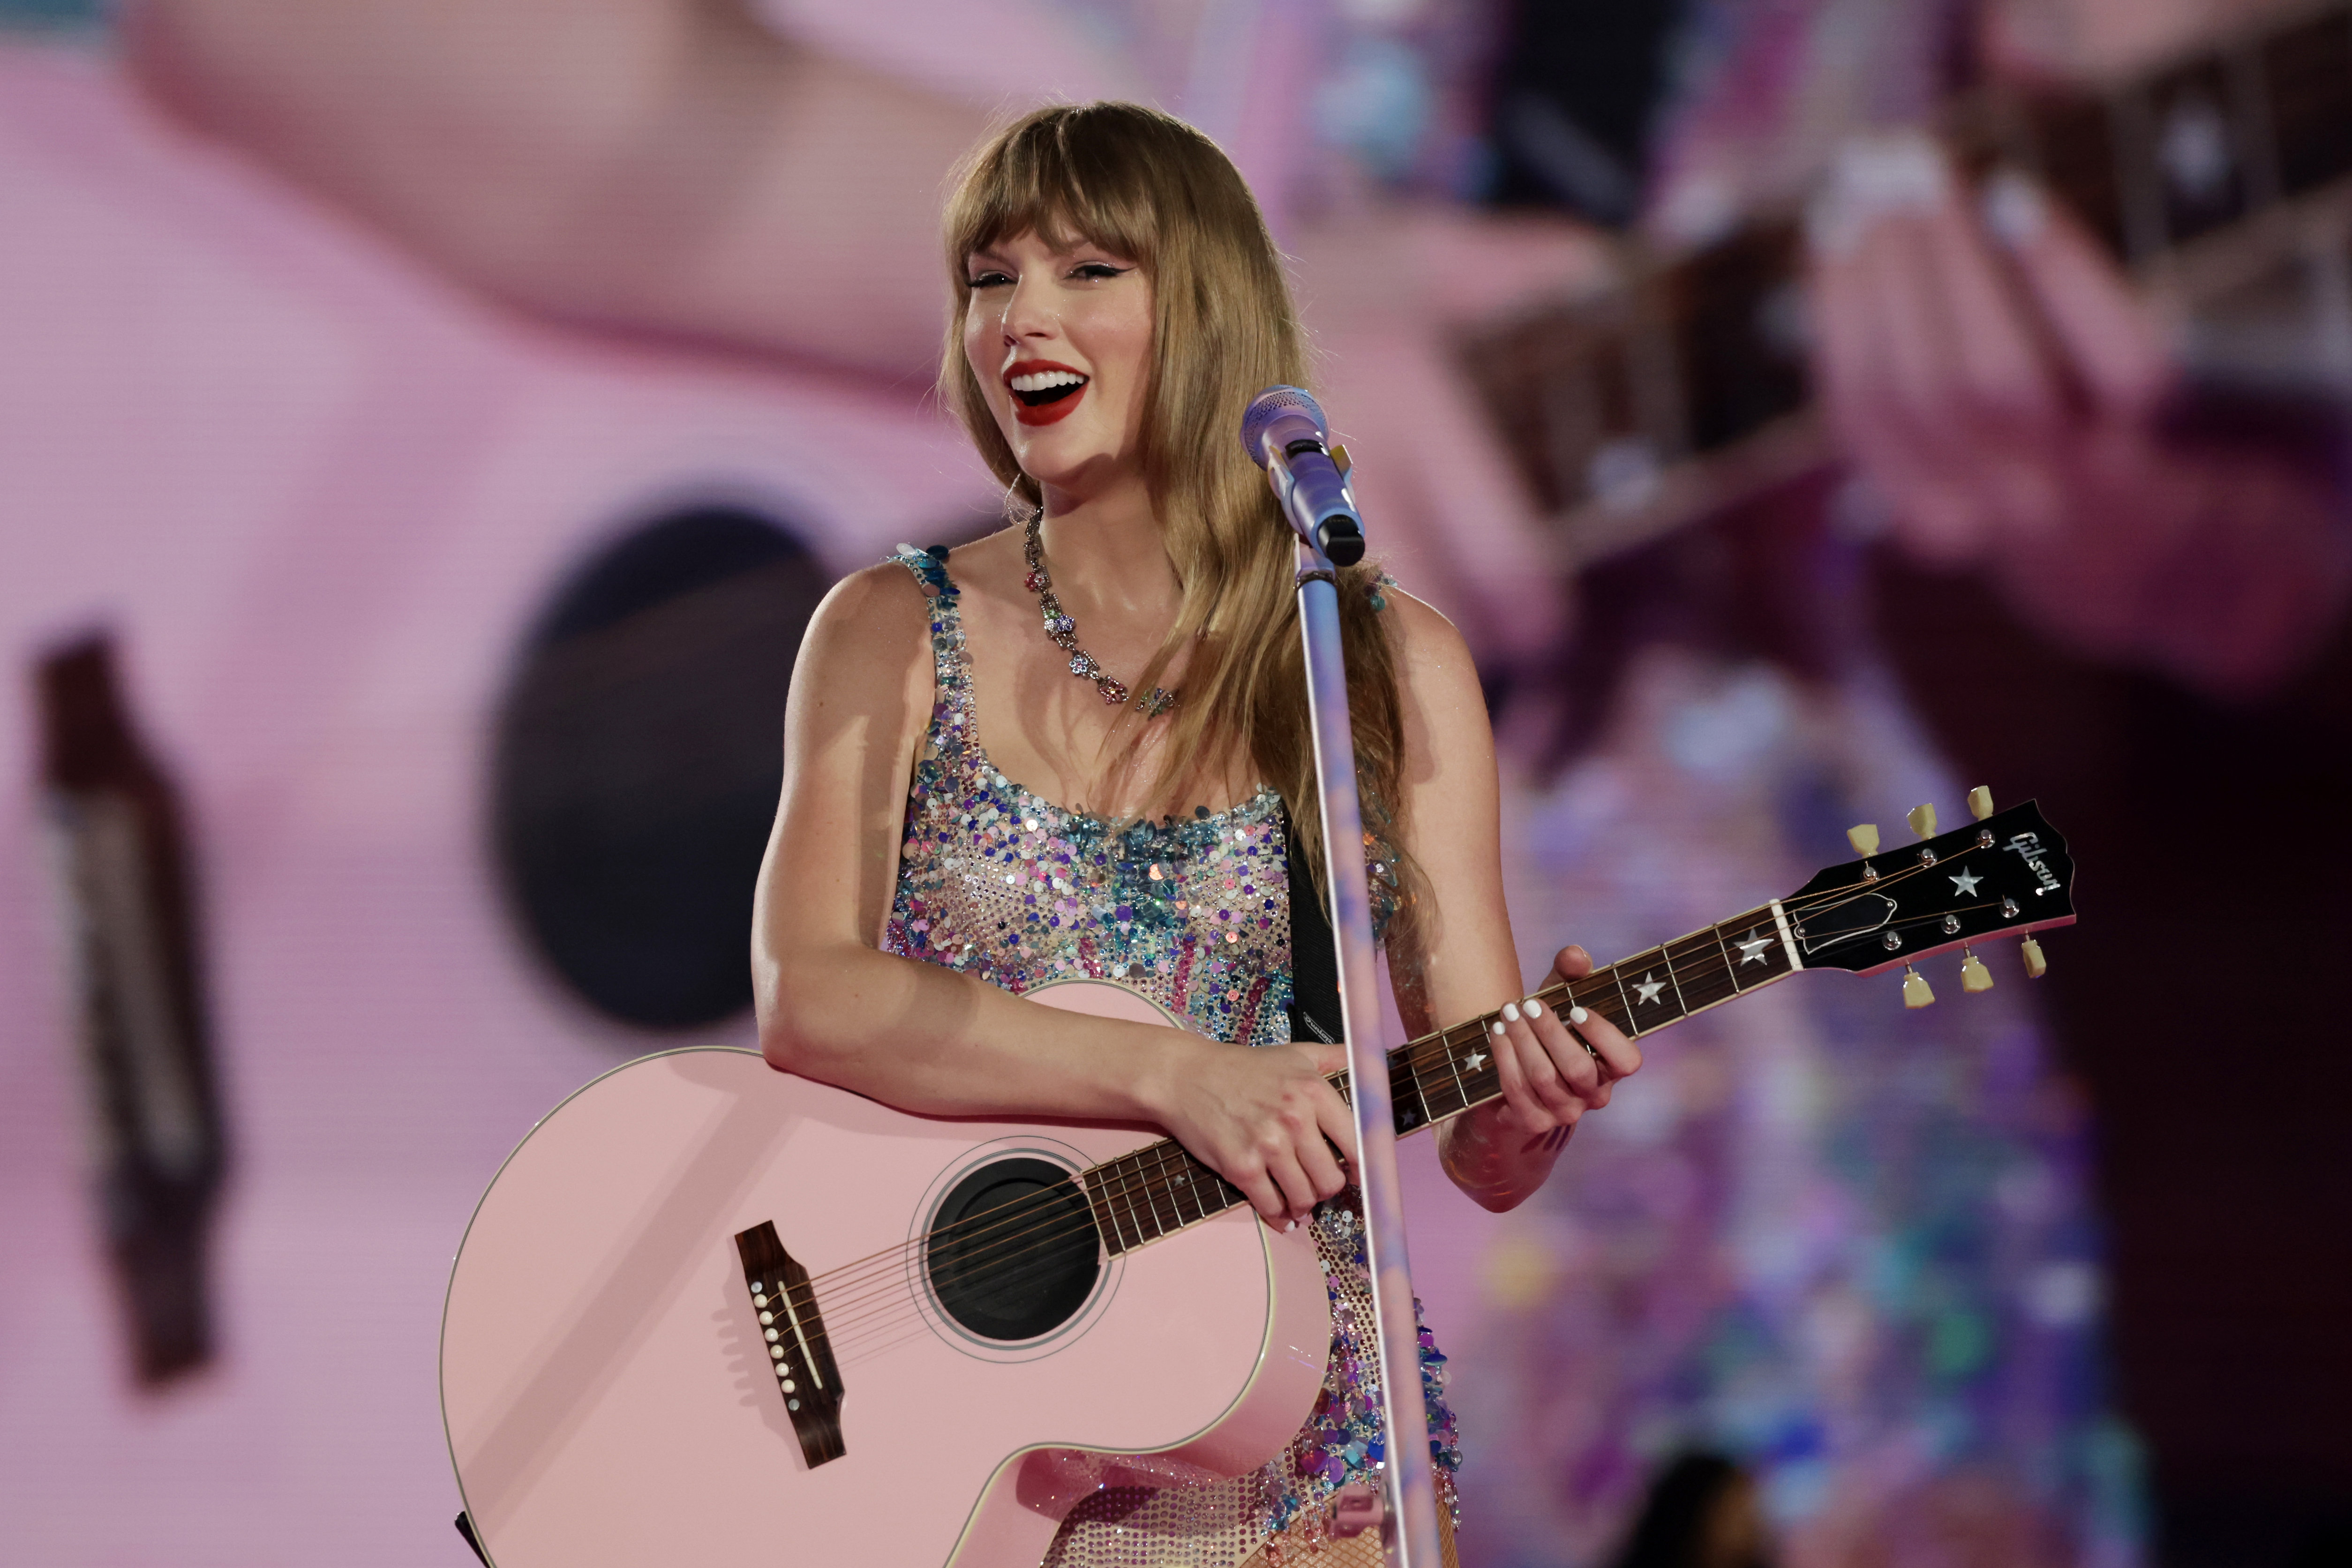 Taylor Swift shocks fans by dropping second ‘Tortured Poets
Department' album